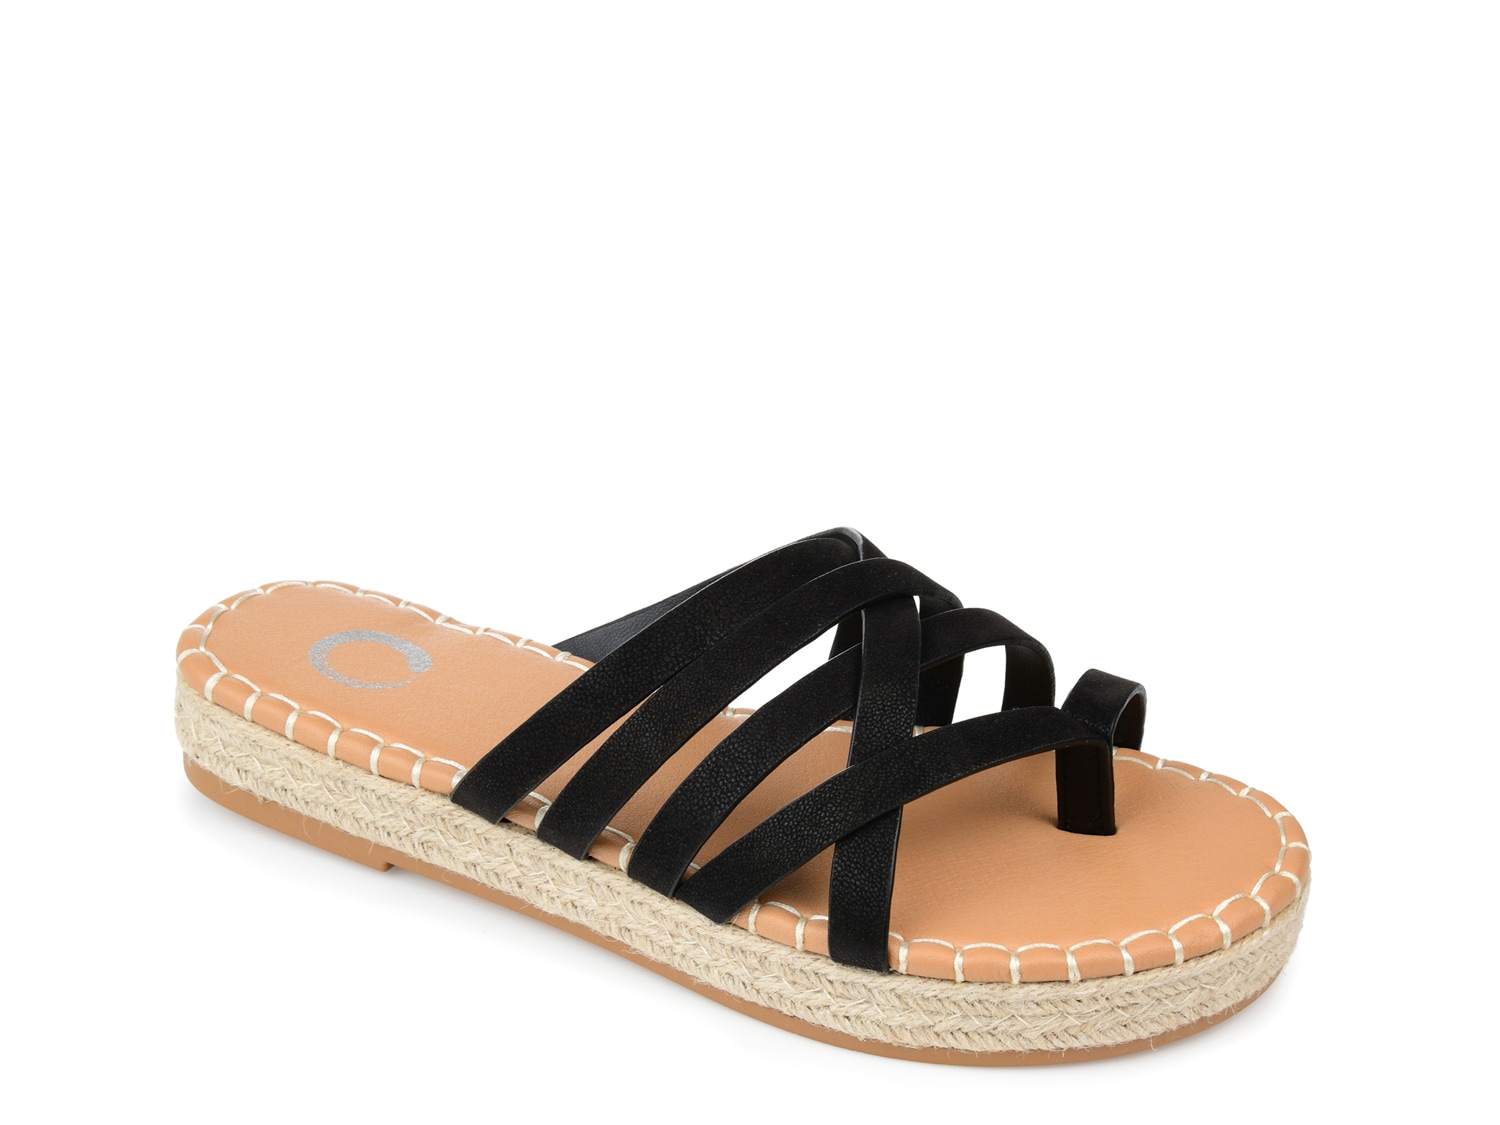 Journee Collection Emmia Espadrille Sandal - Free Shipping | DSW